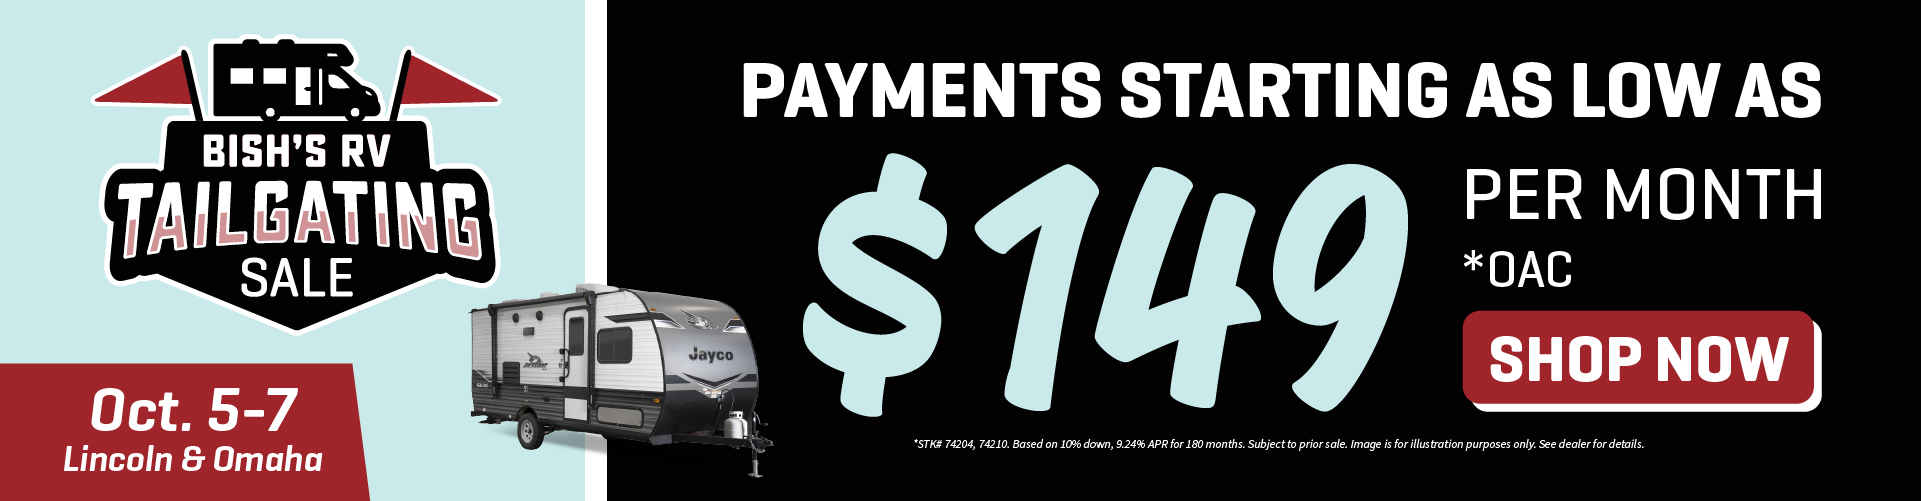 Bish's RV Tailgating Sale - Oct. 5-7 - Find payments starting under $149 per month OAC